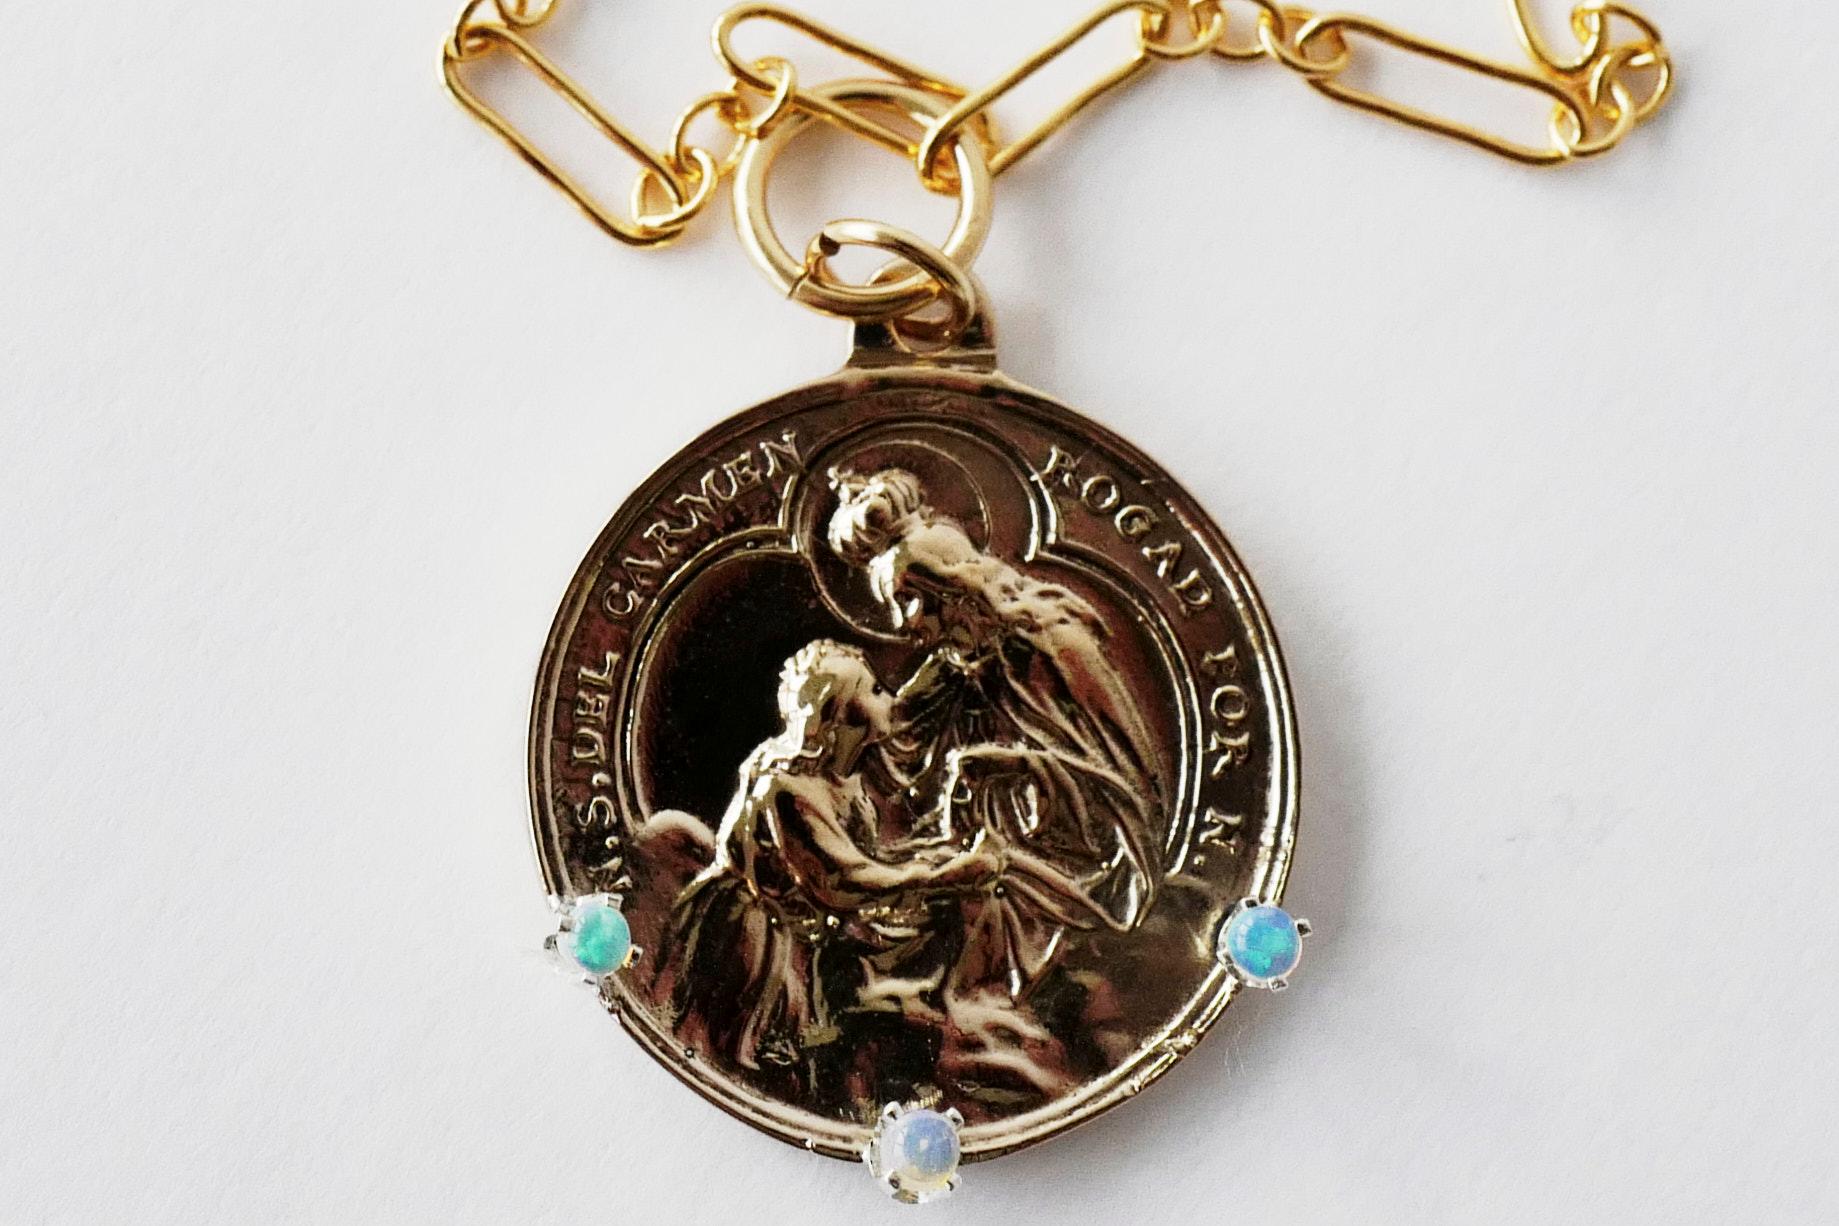 Virgin Mary Opal Medal Necklace Chunky Chain Pendant J Dauphin For Sale 6